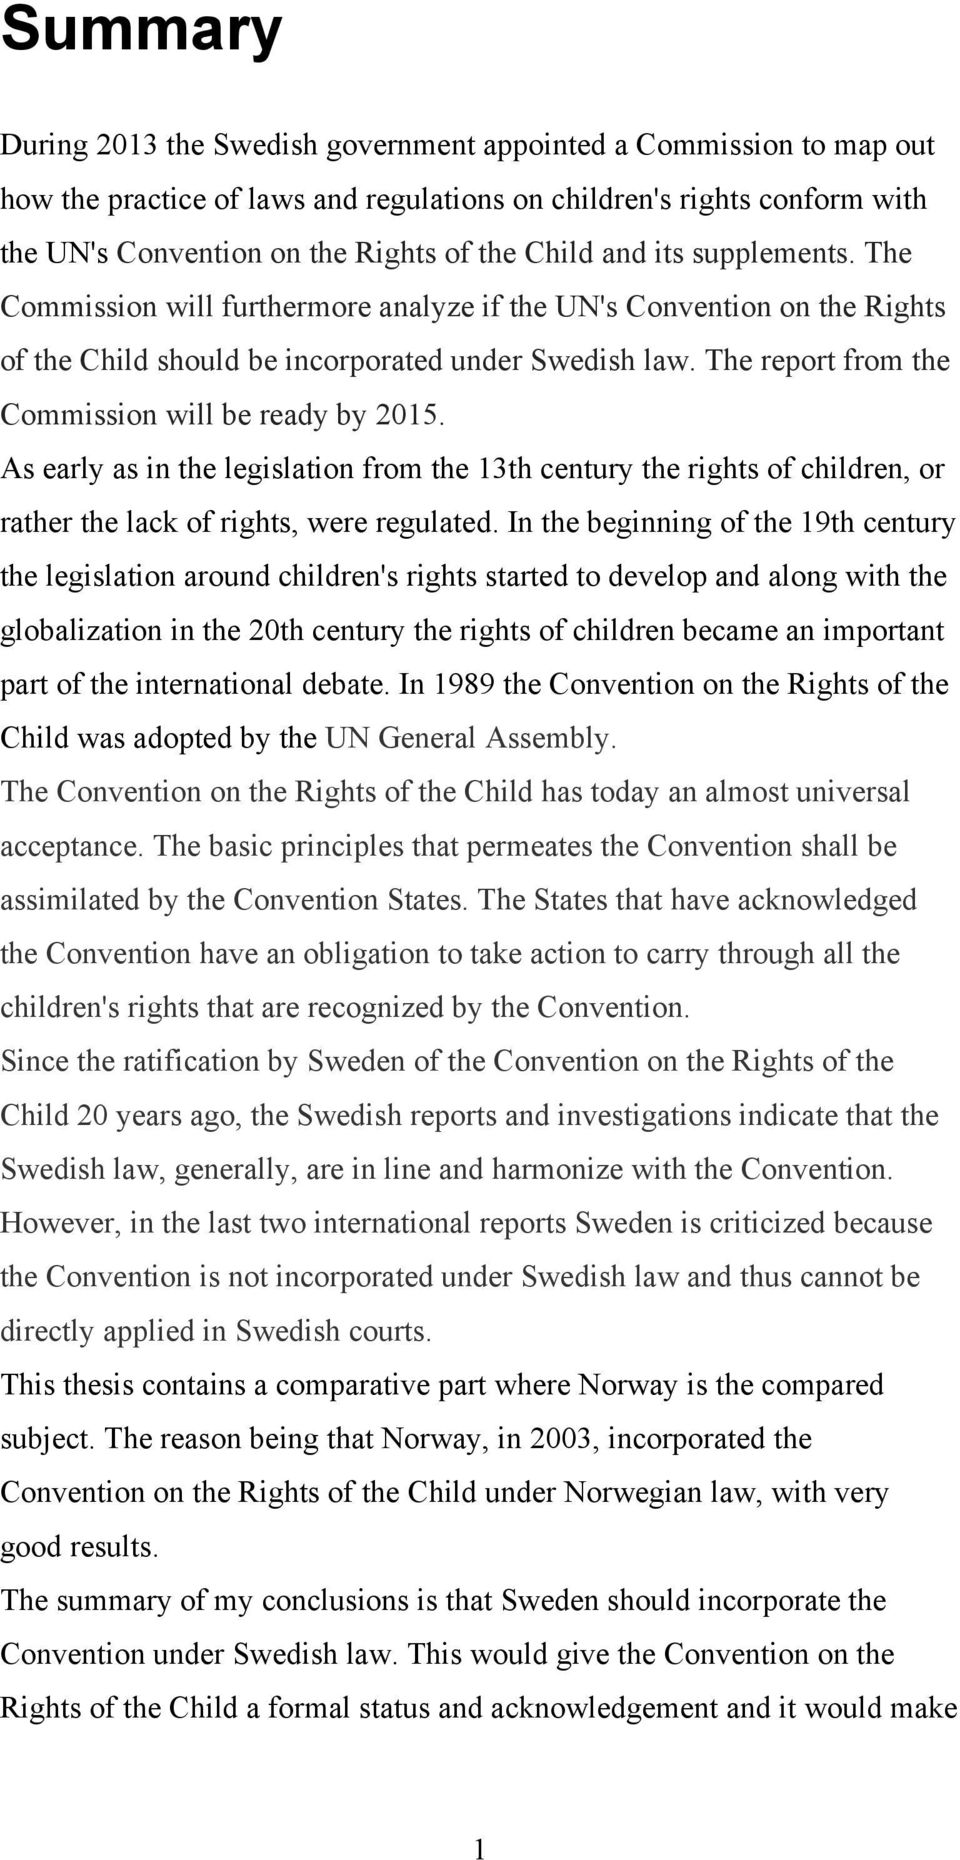 The report from the Commission will be ready by 2015. As early as in the legislation from the 13th century the rights of children, or rather the lack of rights, were regulated.